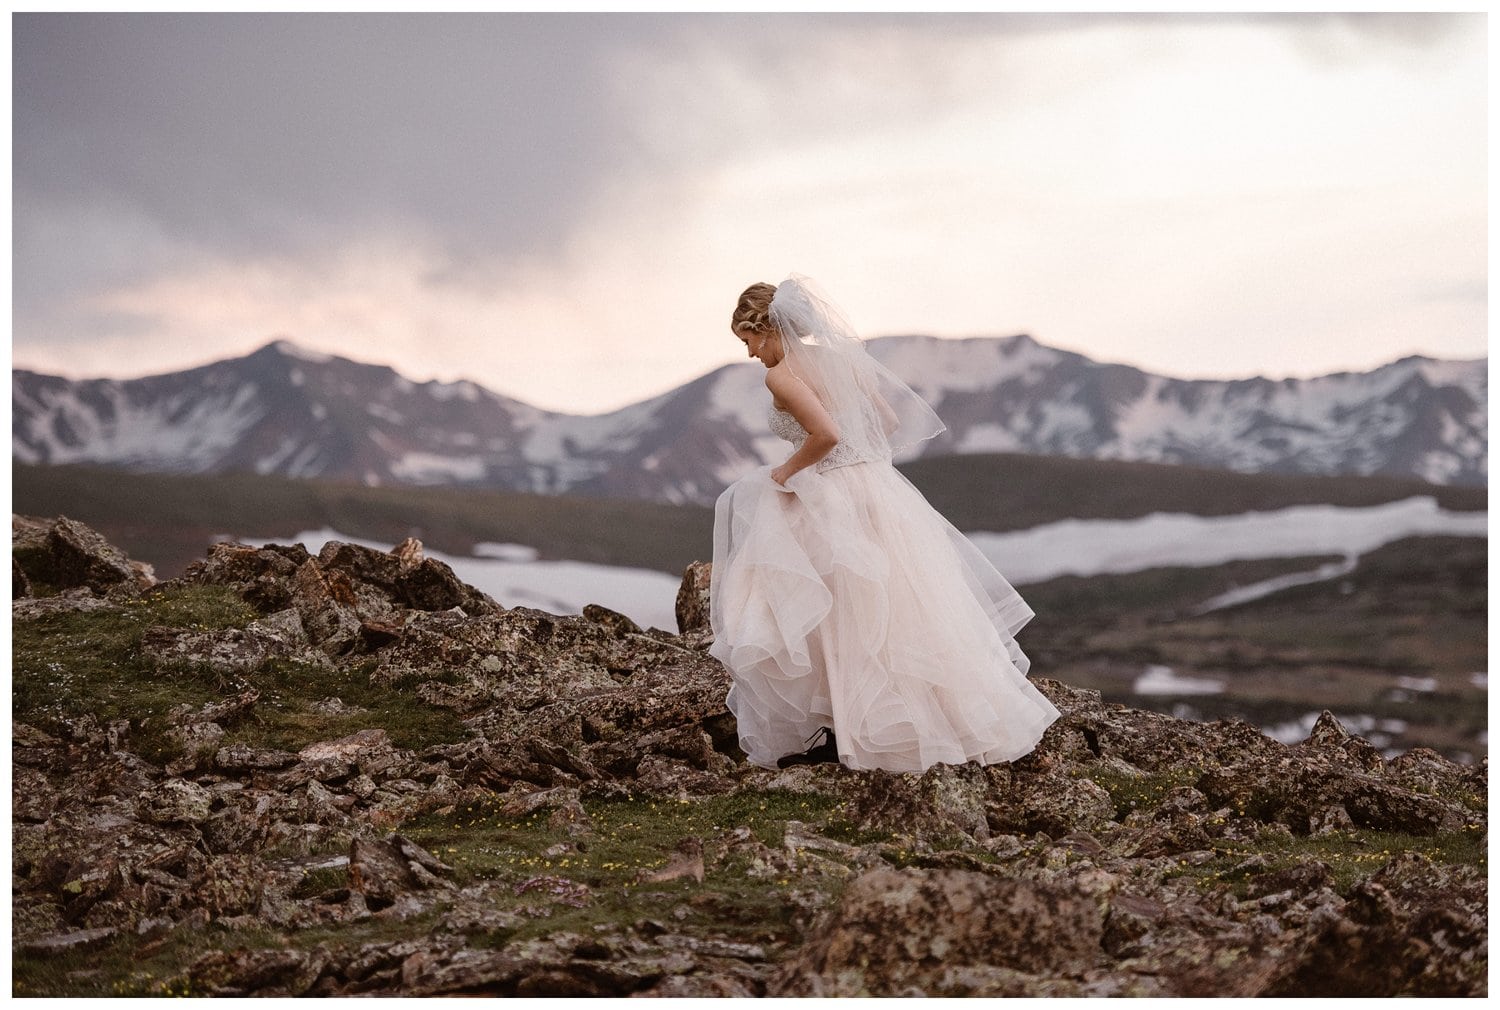 Bride wearing two-piece white dress and veil at Trail Ridge Road in Rocky Mountain National Park, Colorado. There are snow-capped mountains in the background. 